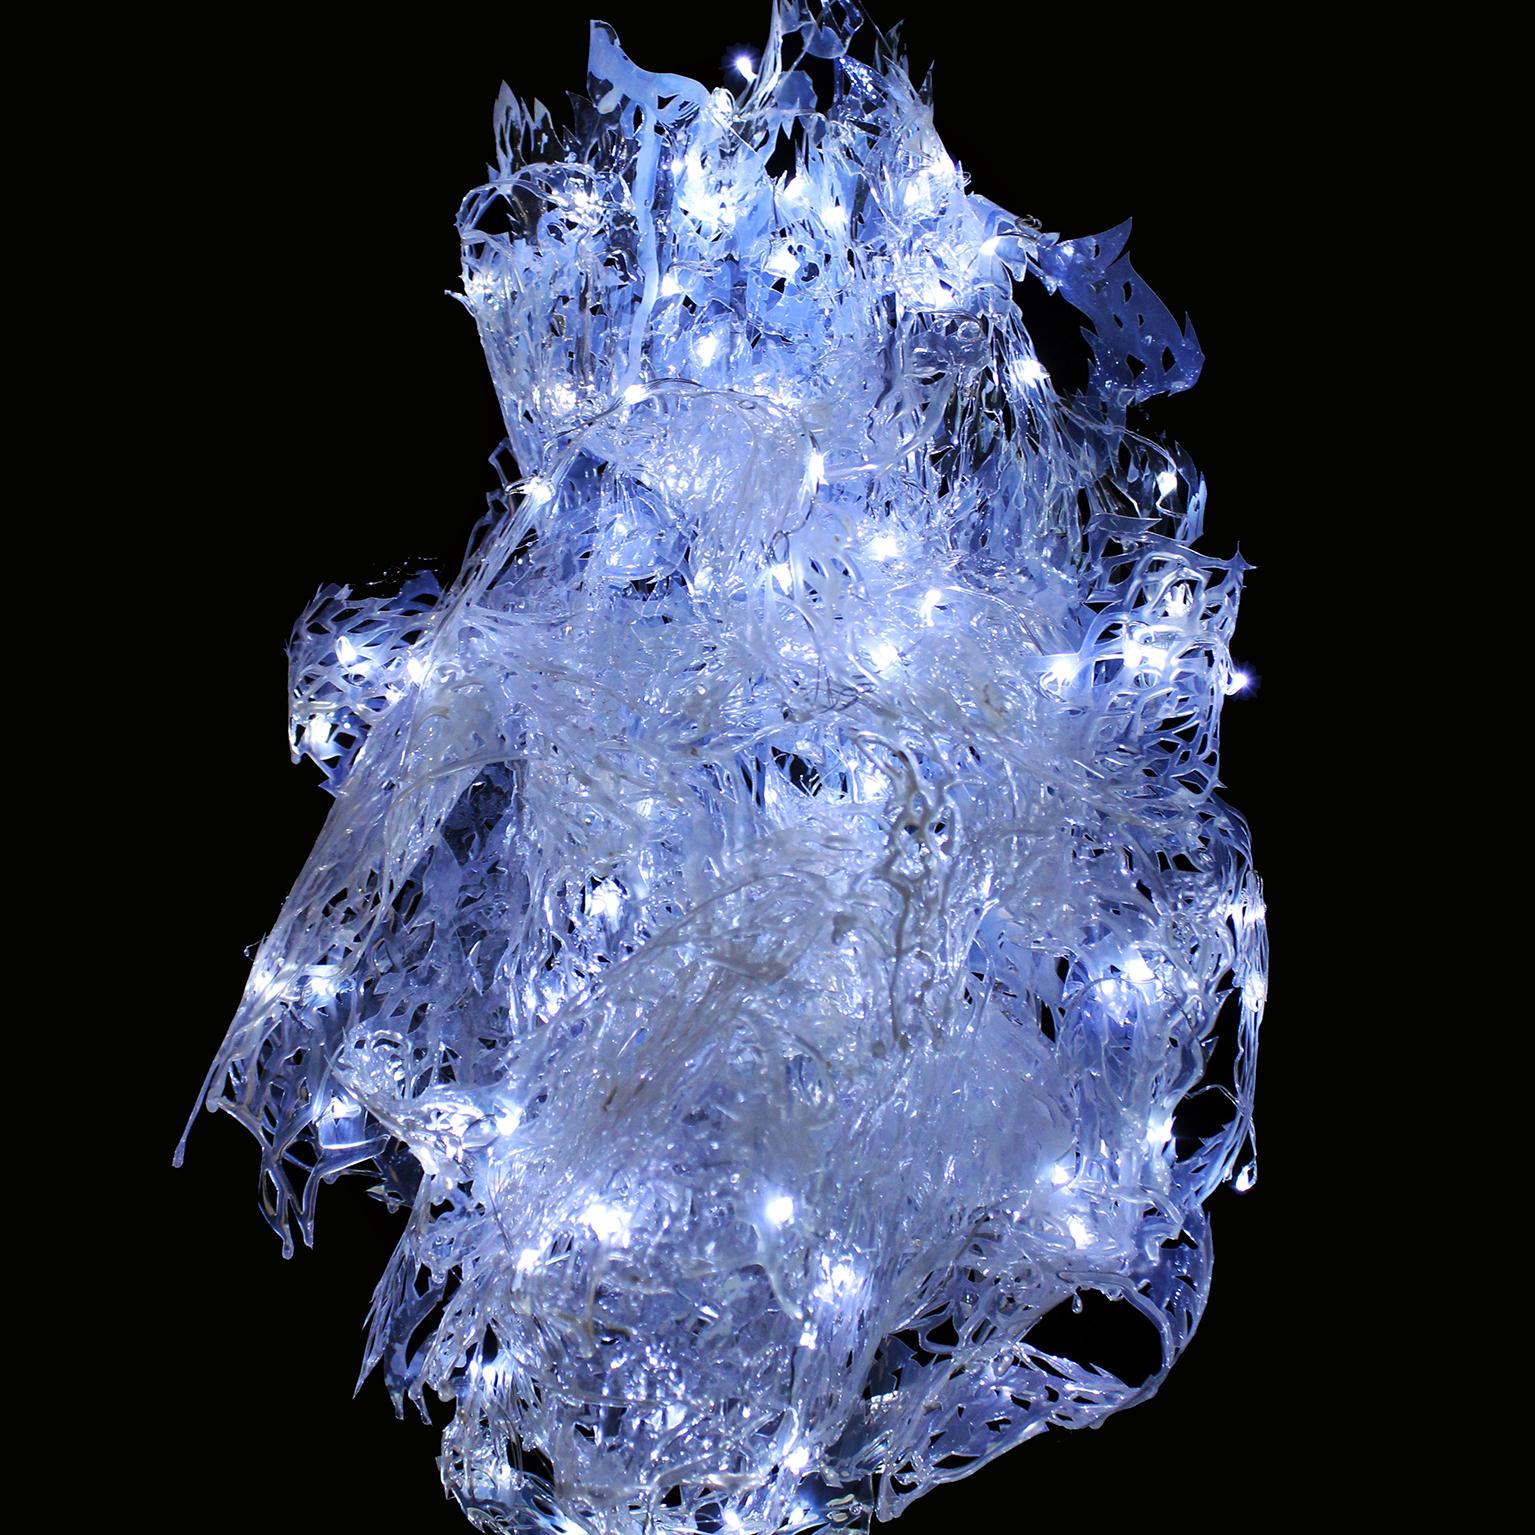 Medium: hand cut plastic, pigment, dichroic, resin, LED lights

Julia Sinelnikova is an interdisciplinary artist who works with holograms, performance, and digital culture. Her light installations have been exhibited internationally, and she has